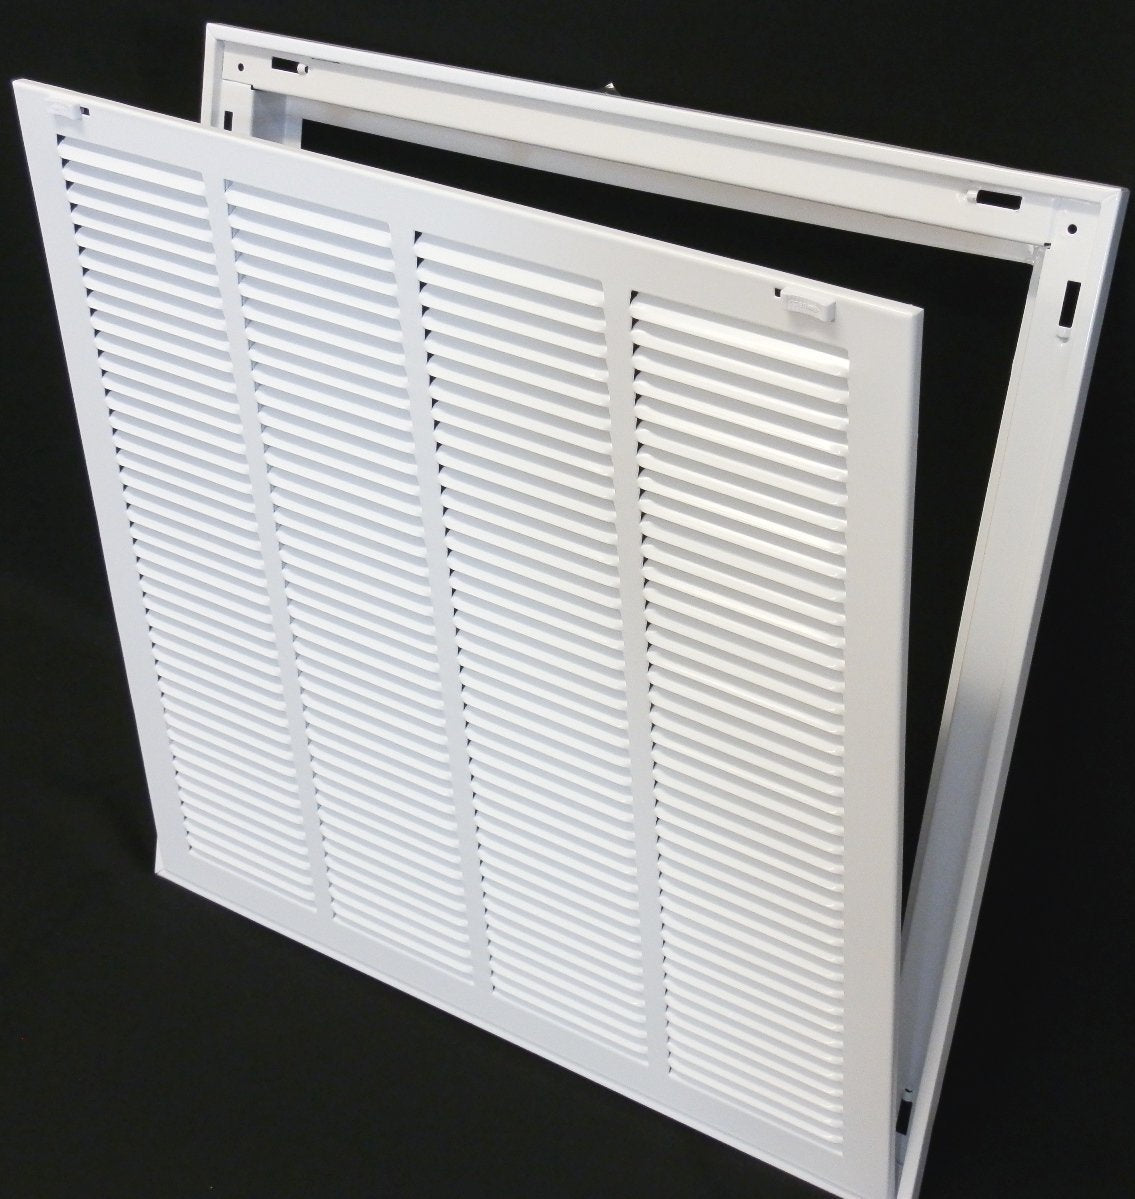 32&quot; X 22&quot; Steel Return Air Filter Grille for 1&quot; Filter - Removable Frame - [Outer Dimensions: 34 5/8&quot; X 24 5/8&quot;]